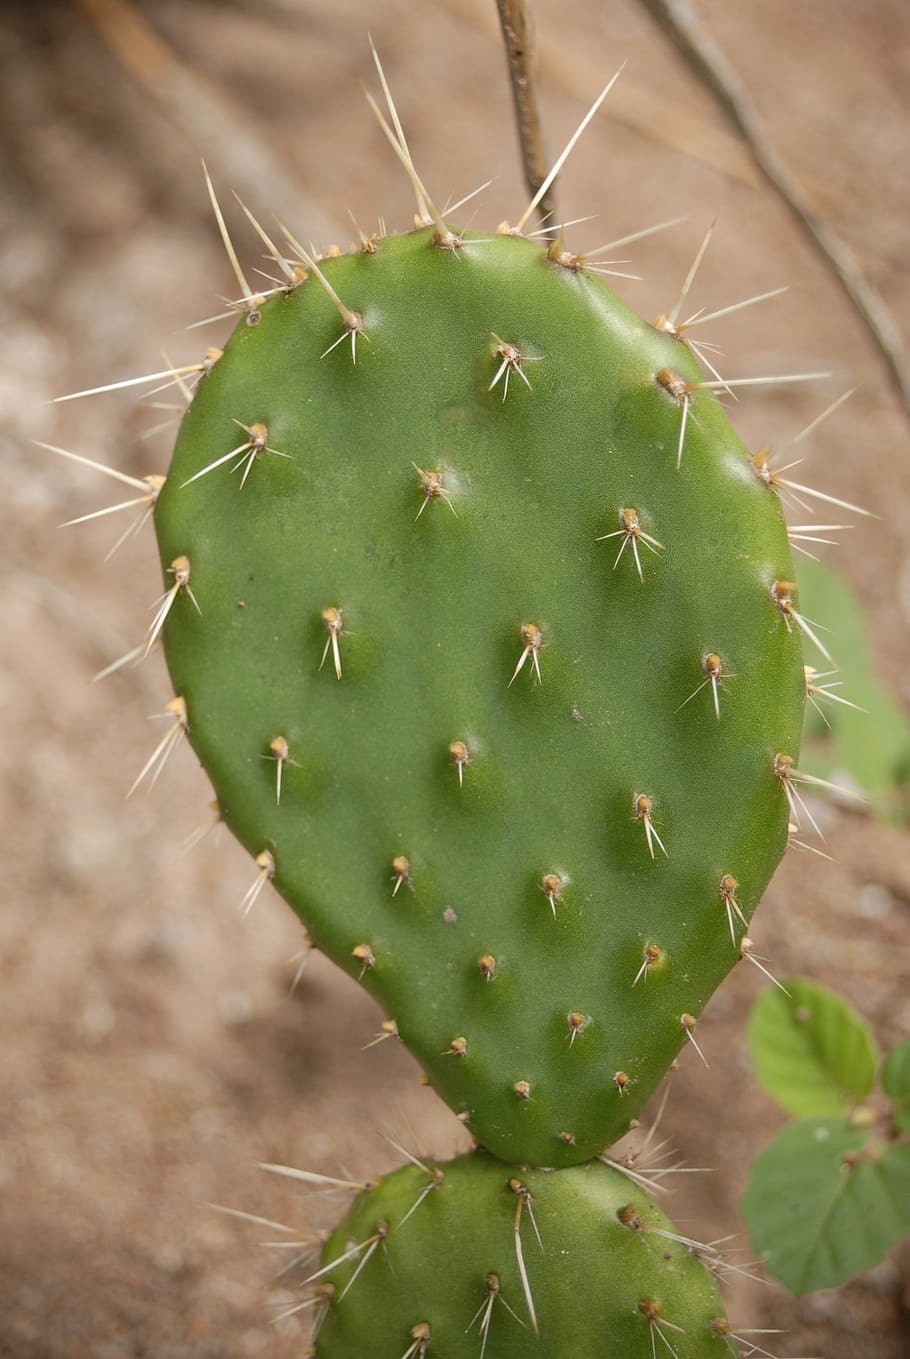 cactus, thorns, nature, succulent plant, thorn, spiked, green color, sharp, growth, plant